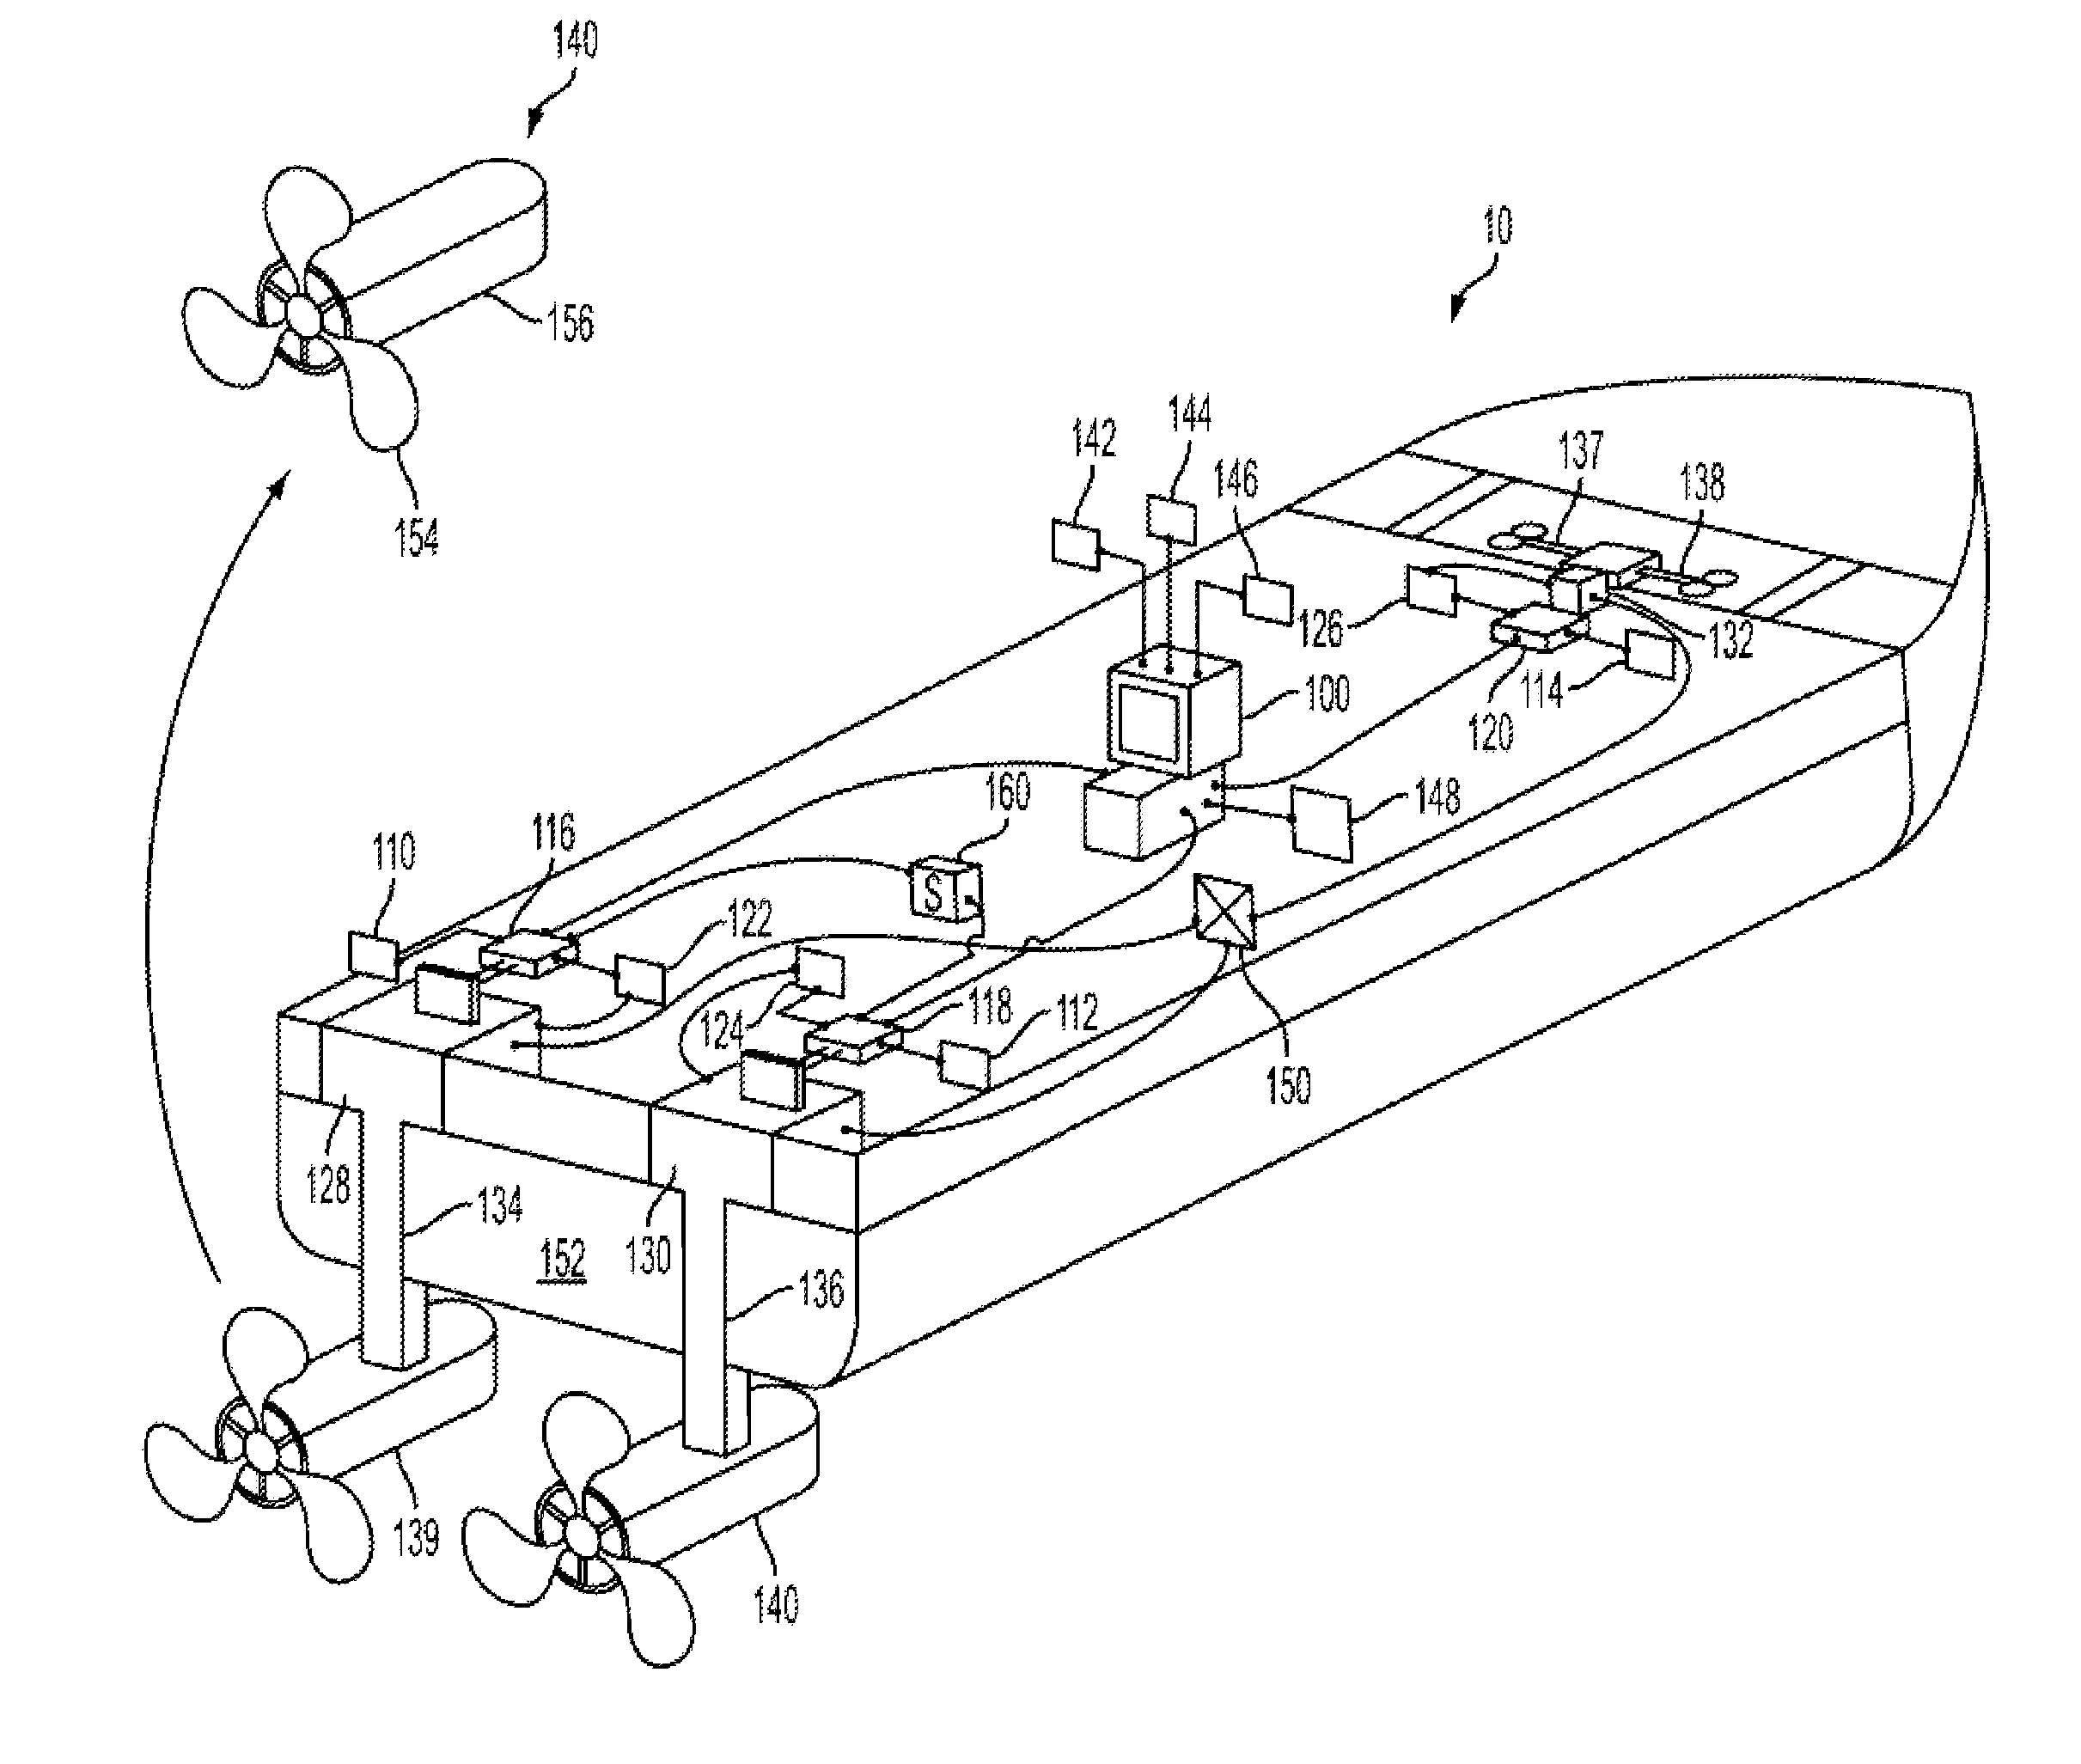 System and method for dynamic energy recovery in marine propulsion